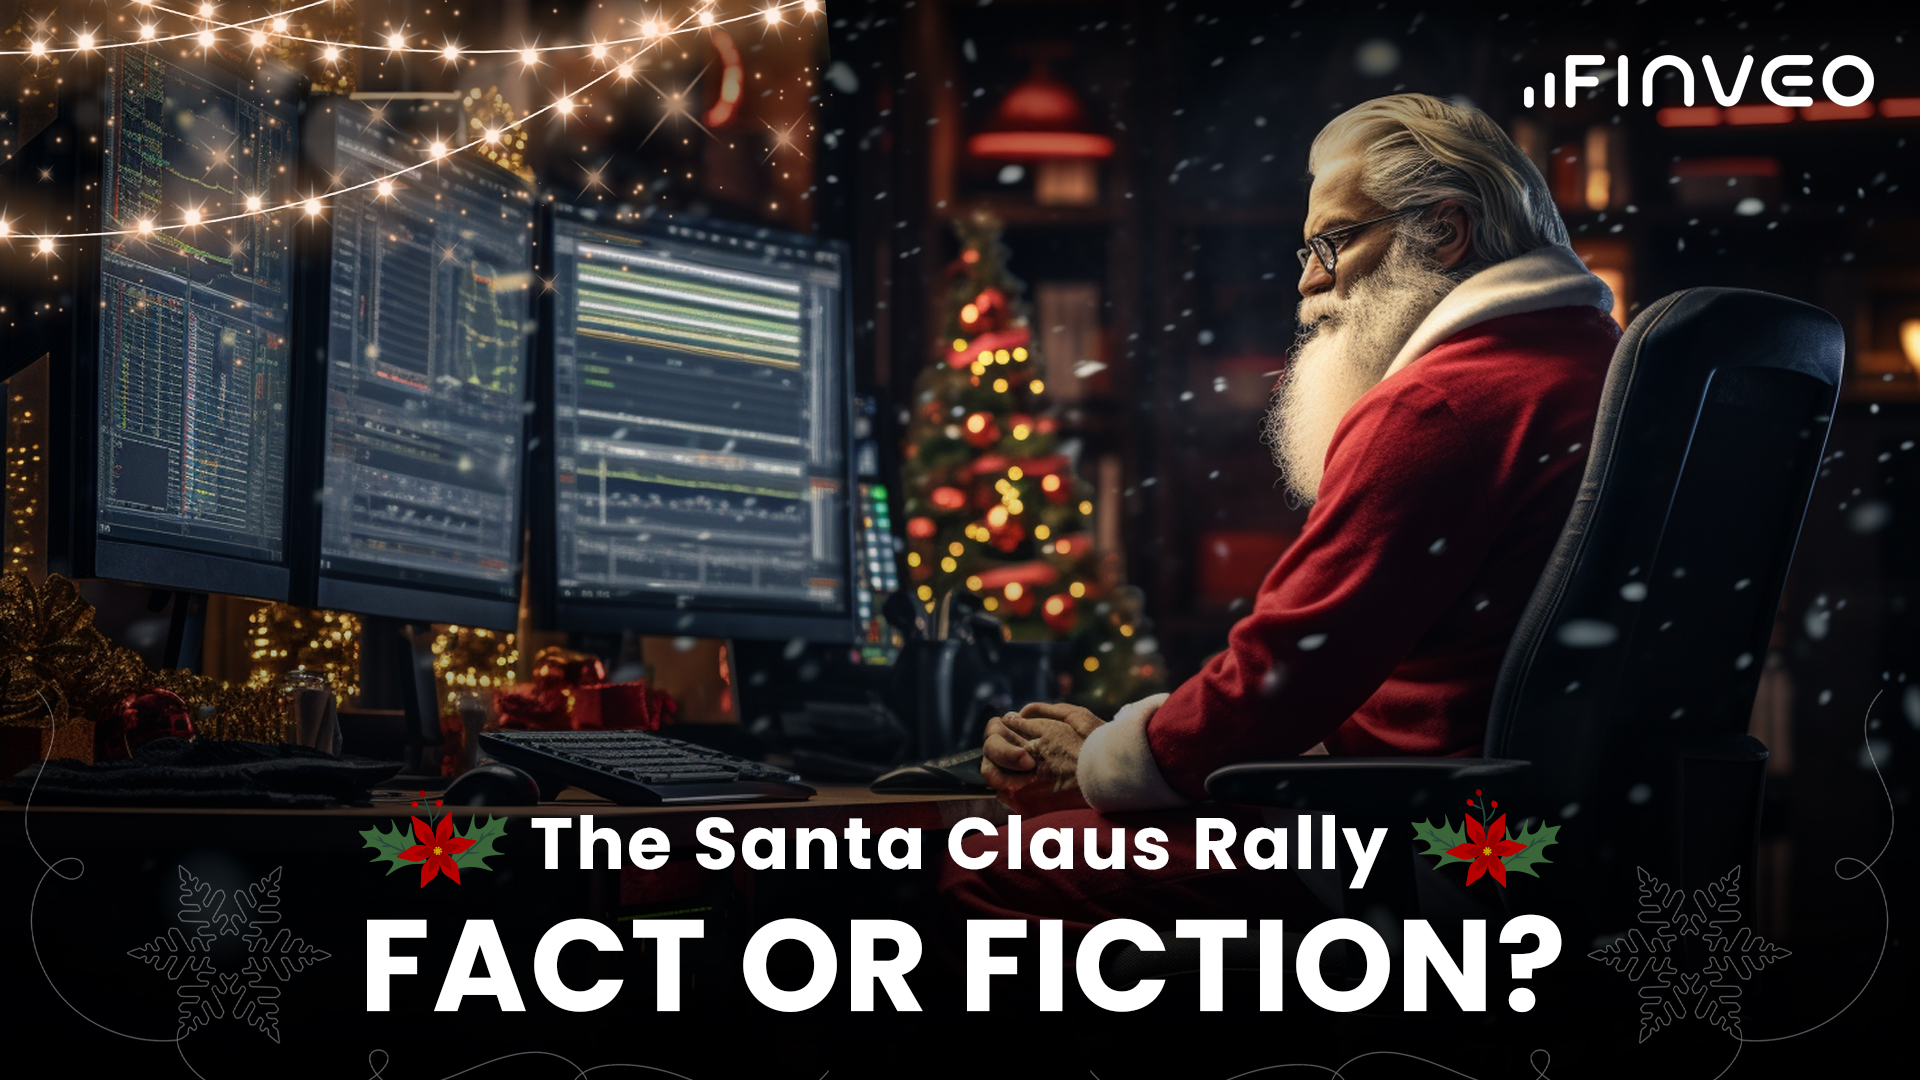 The Santa Claus Rally: Fact or Fiction?